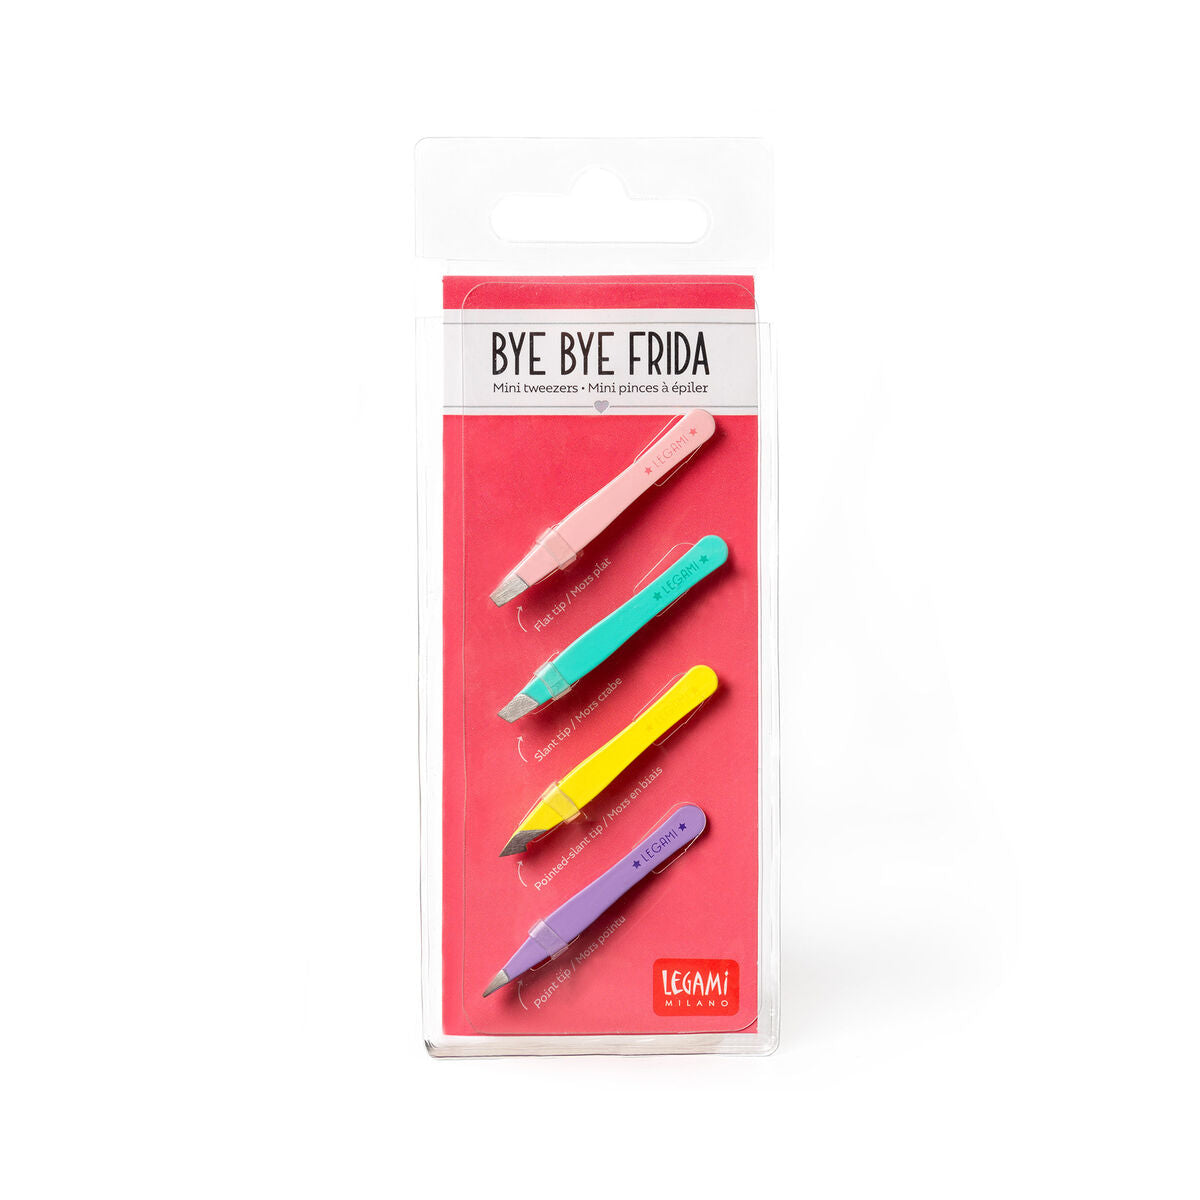 Legami Mini Tweezers | Packaging | Unique Gift Ideas for Her | for Mom | for Women | for Females | for Wife | for Sister | for Girlfriend | for Grandma | for Friends | for Birthday | Gifting Made Simple | Unique Gift Ideas for Him | for Dad | for Men | for Males | for Husband | for Brother | for Boyfriend | for Grandad